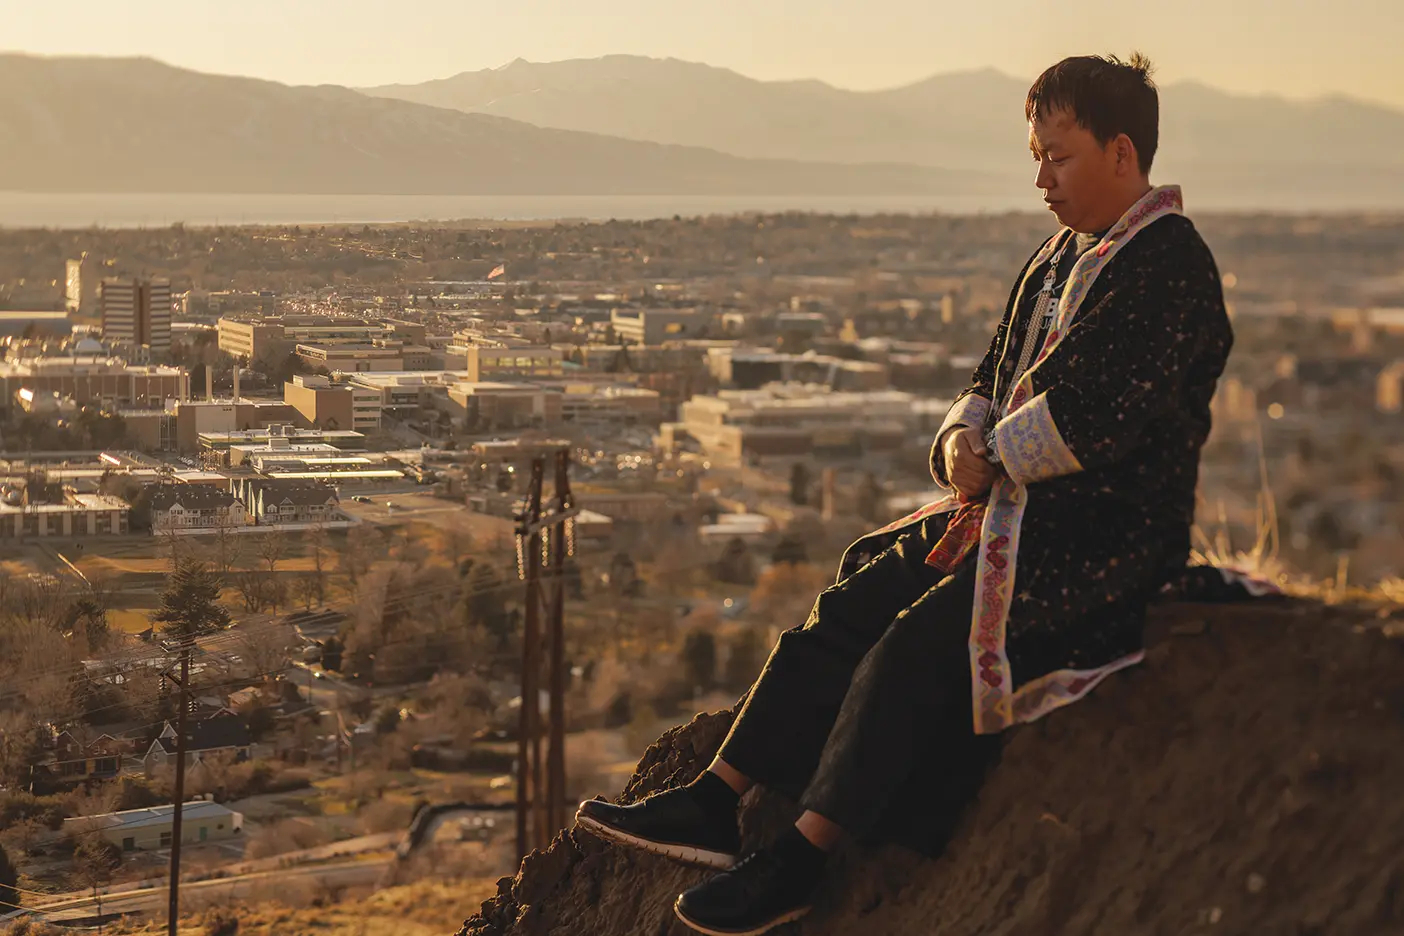 Yang Vang sits on a sun-bathed slope overlooking BYU's campus, wearing traditionall Hmong clothing.